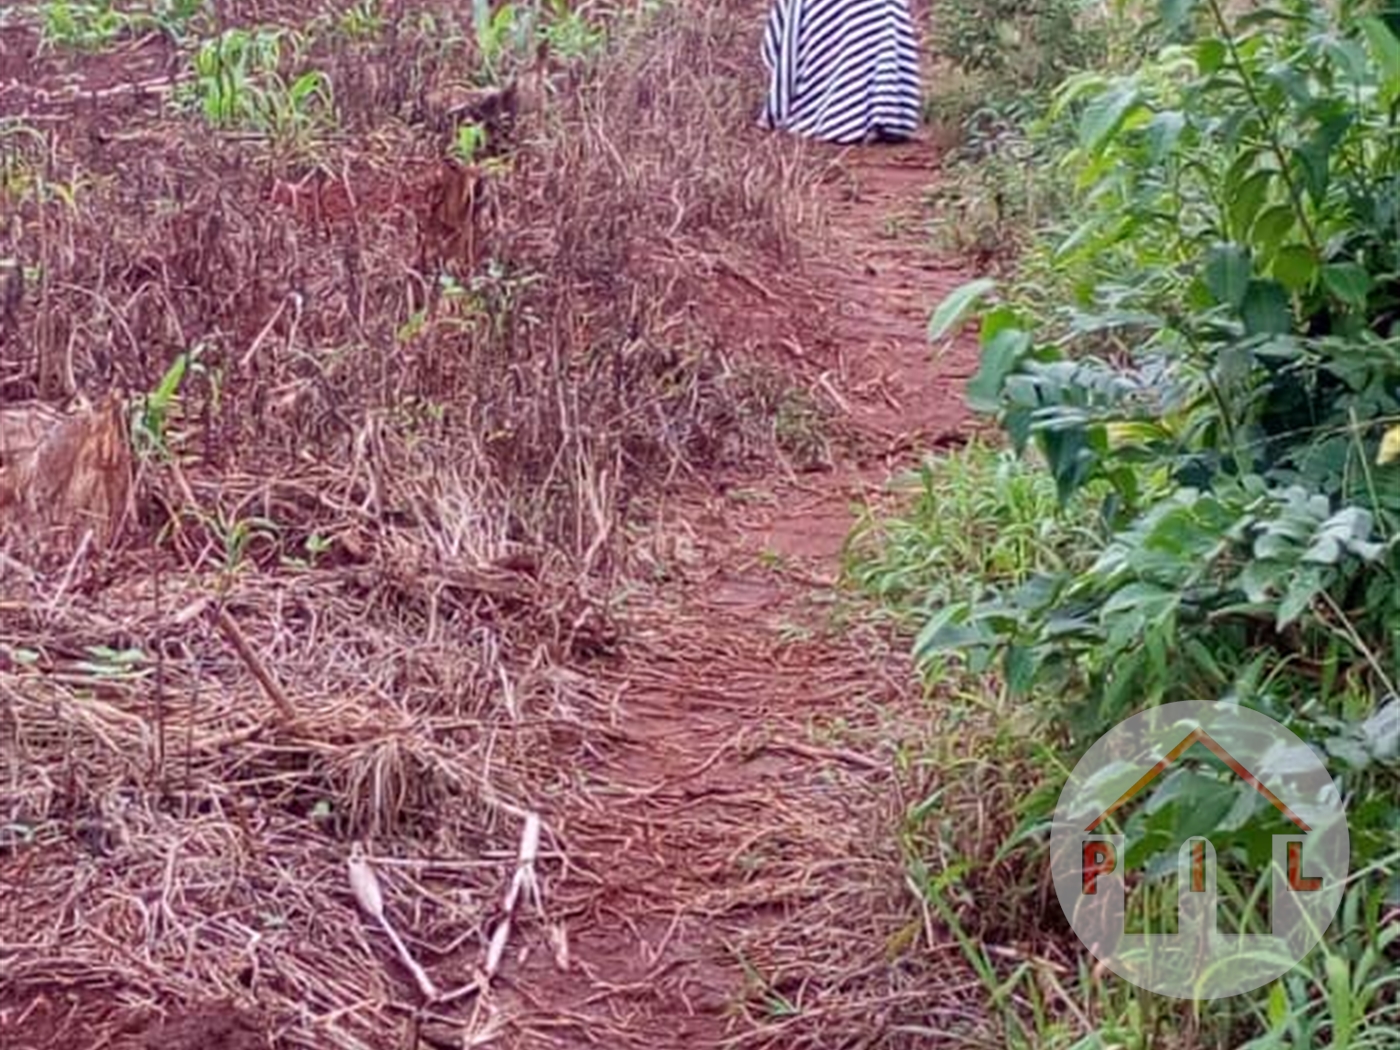 Agricultural Land for sale in Tanda Mityana